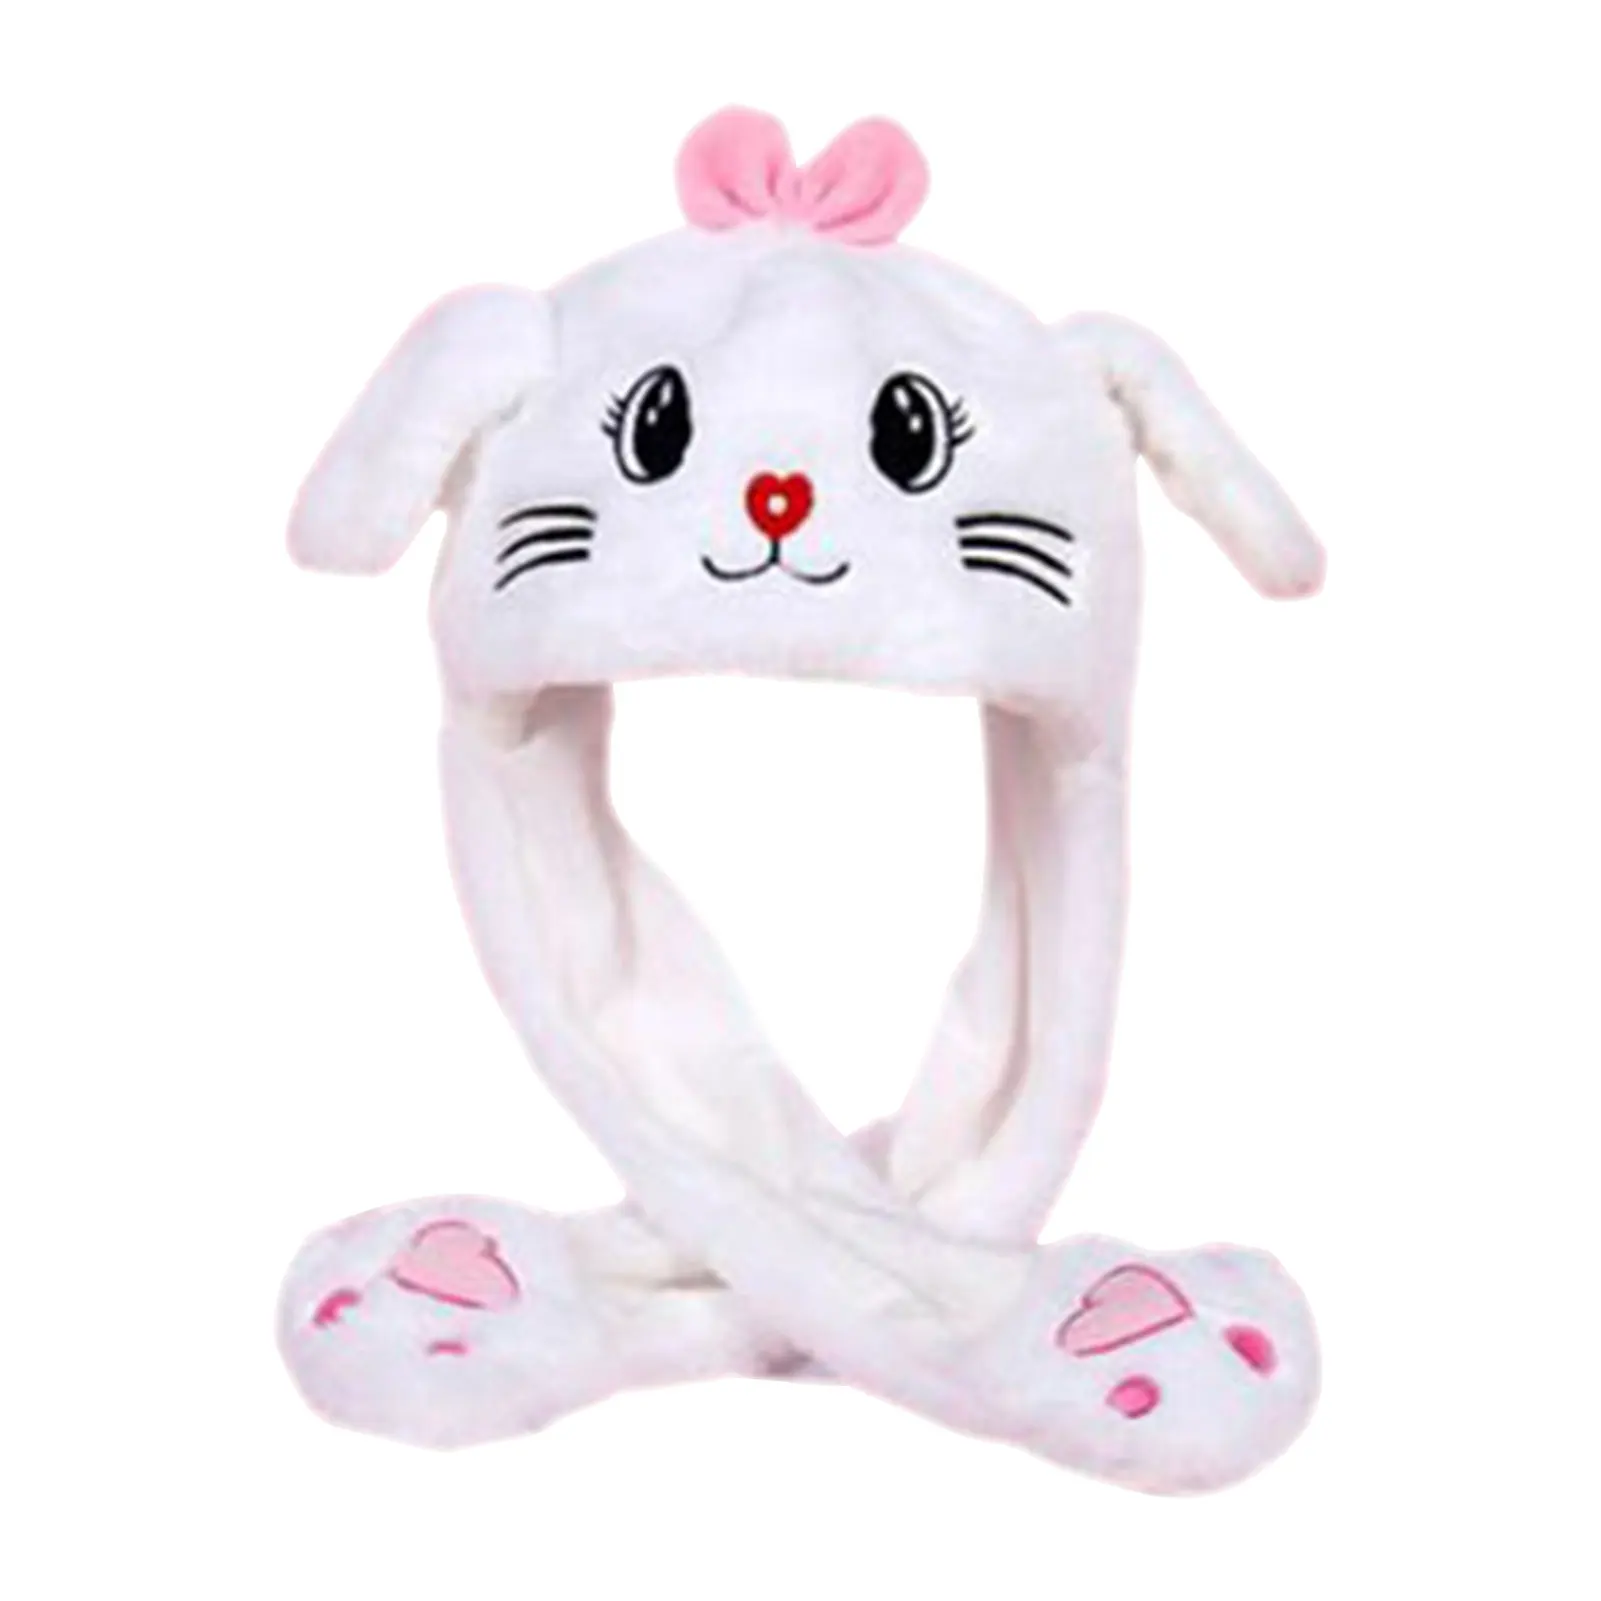 Lovely Moving Bunny Ears Hat Plush Rabbit Hat Funny Play Toy Up Down Moving Bunny Ears Toy Hat Girlfriend Children Girls Gifts yellow funny hat baby kids hat cute rabbit ears plush ears can move cap children winter warm party hat funny hat for girls